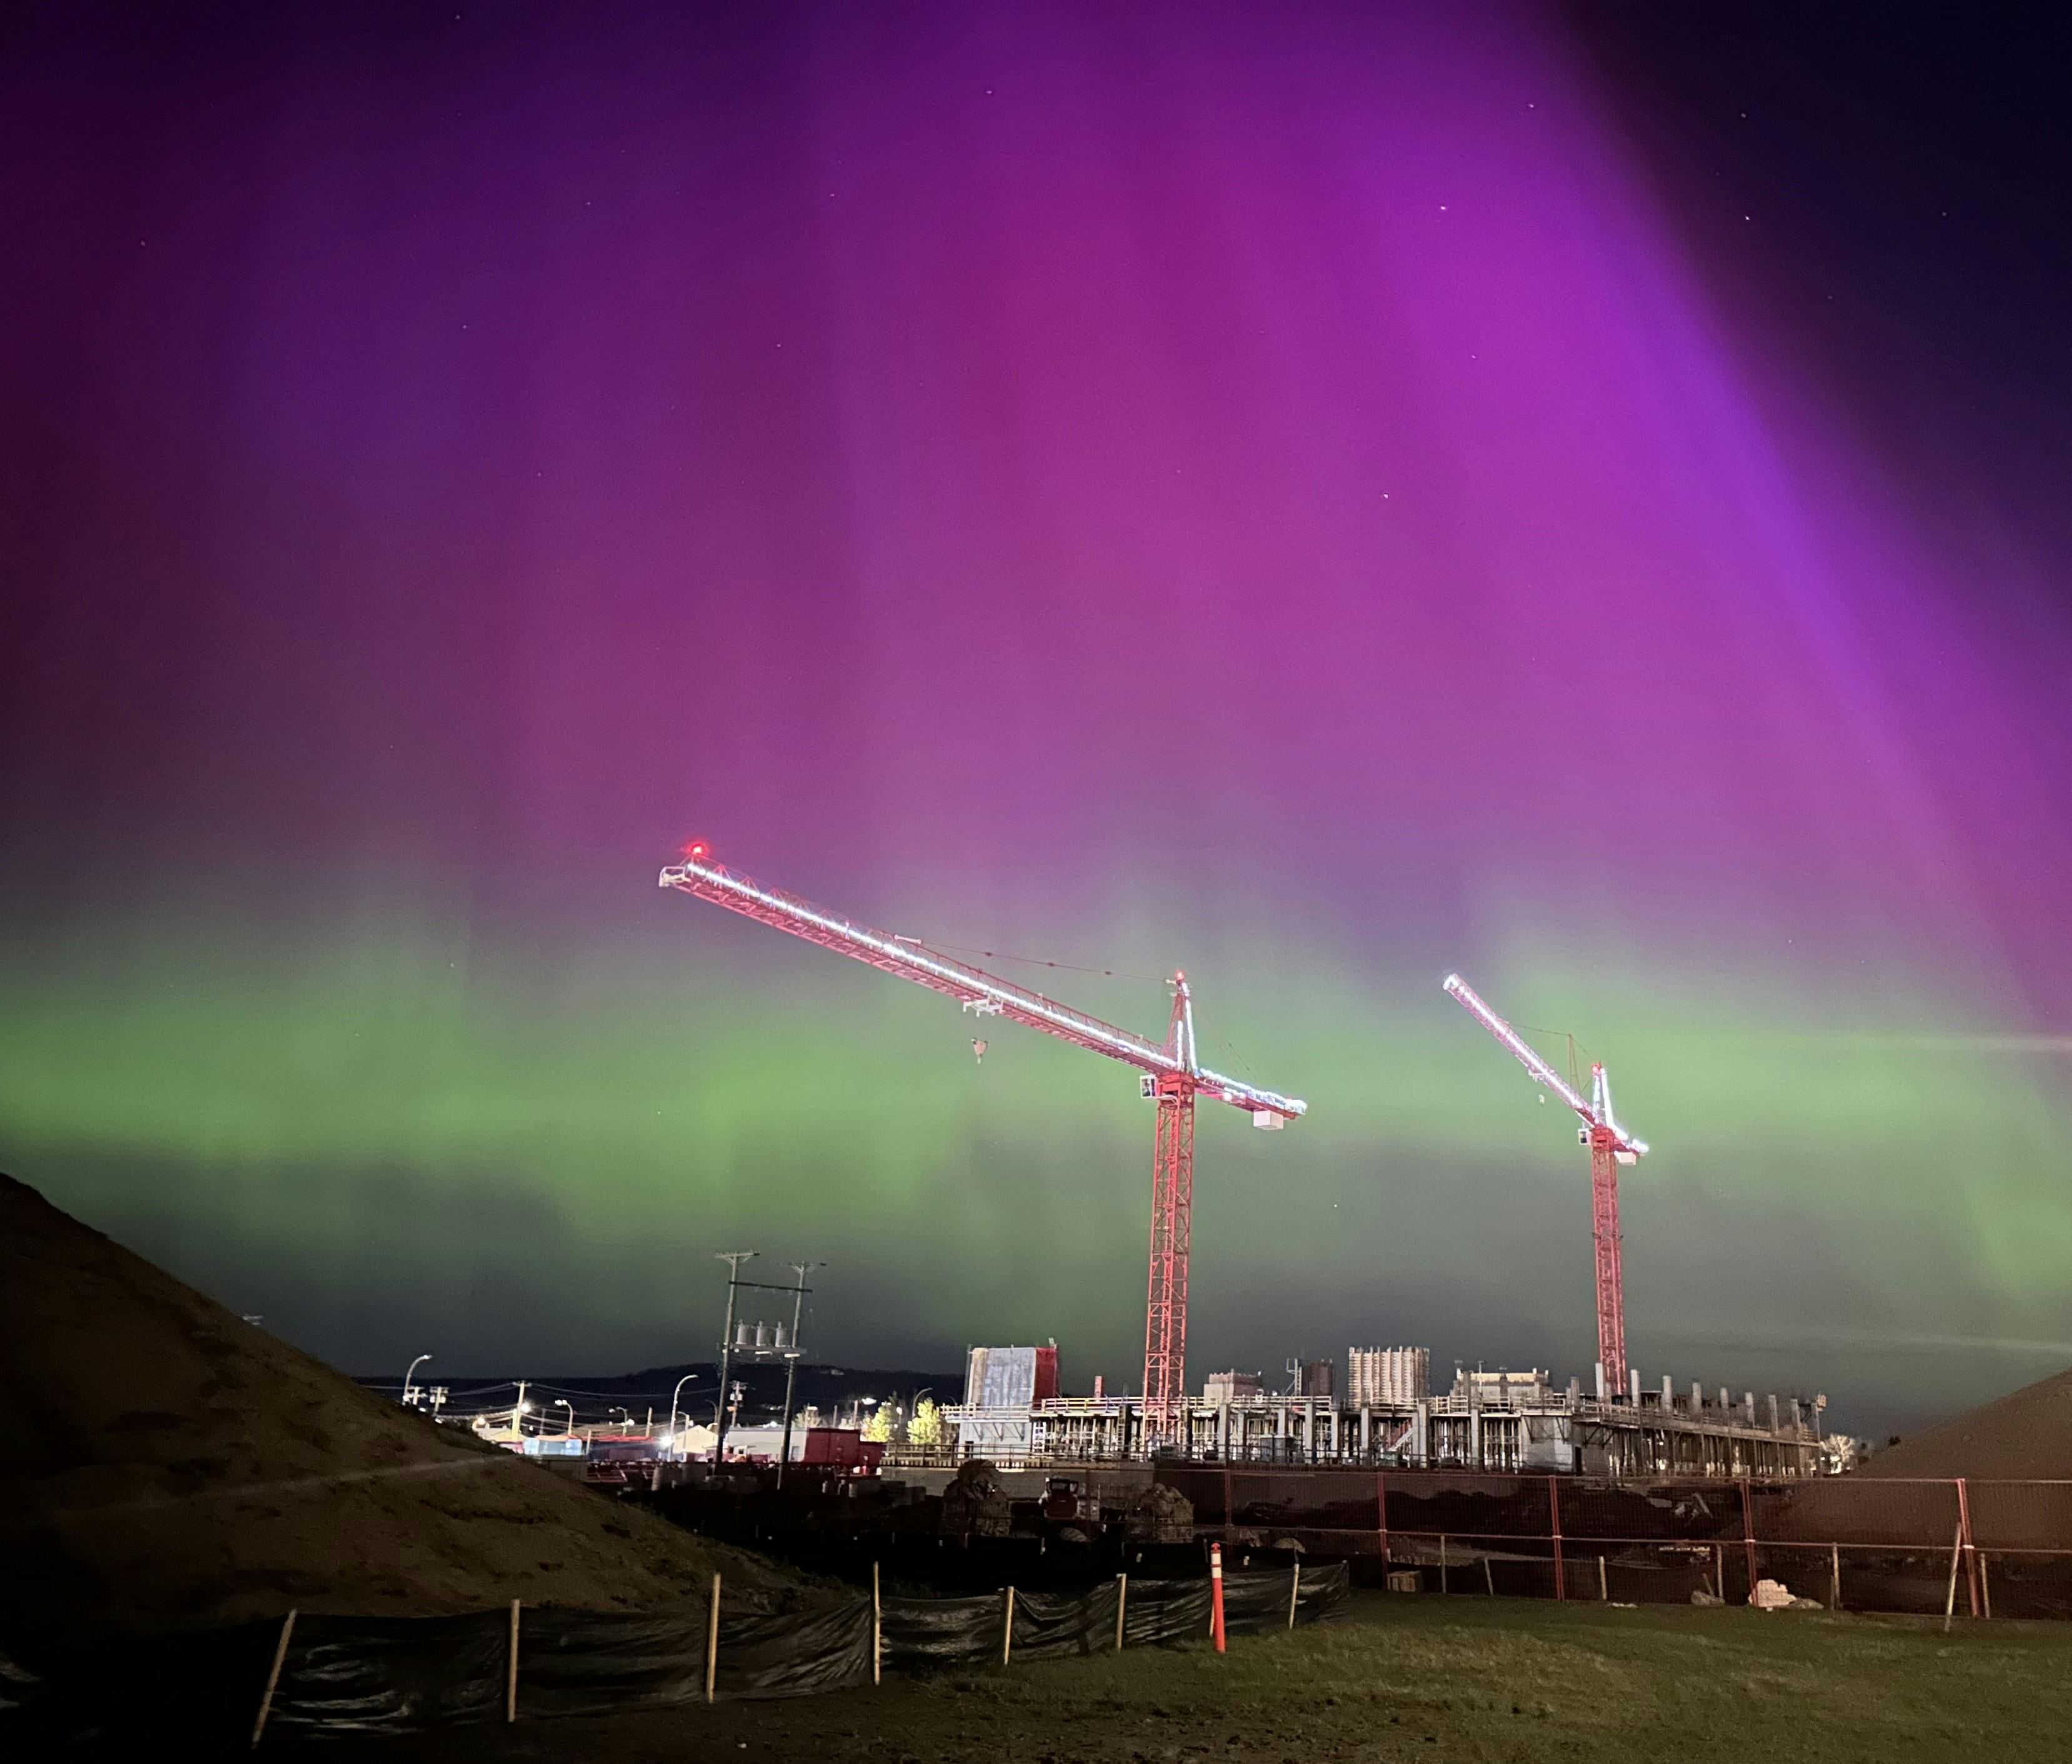 Tower cranes compliment the Northern Lights